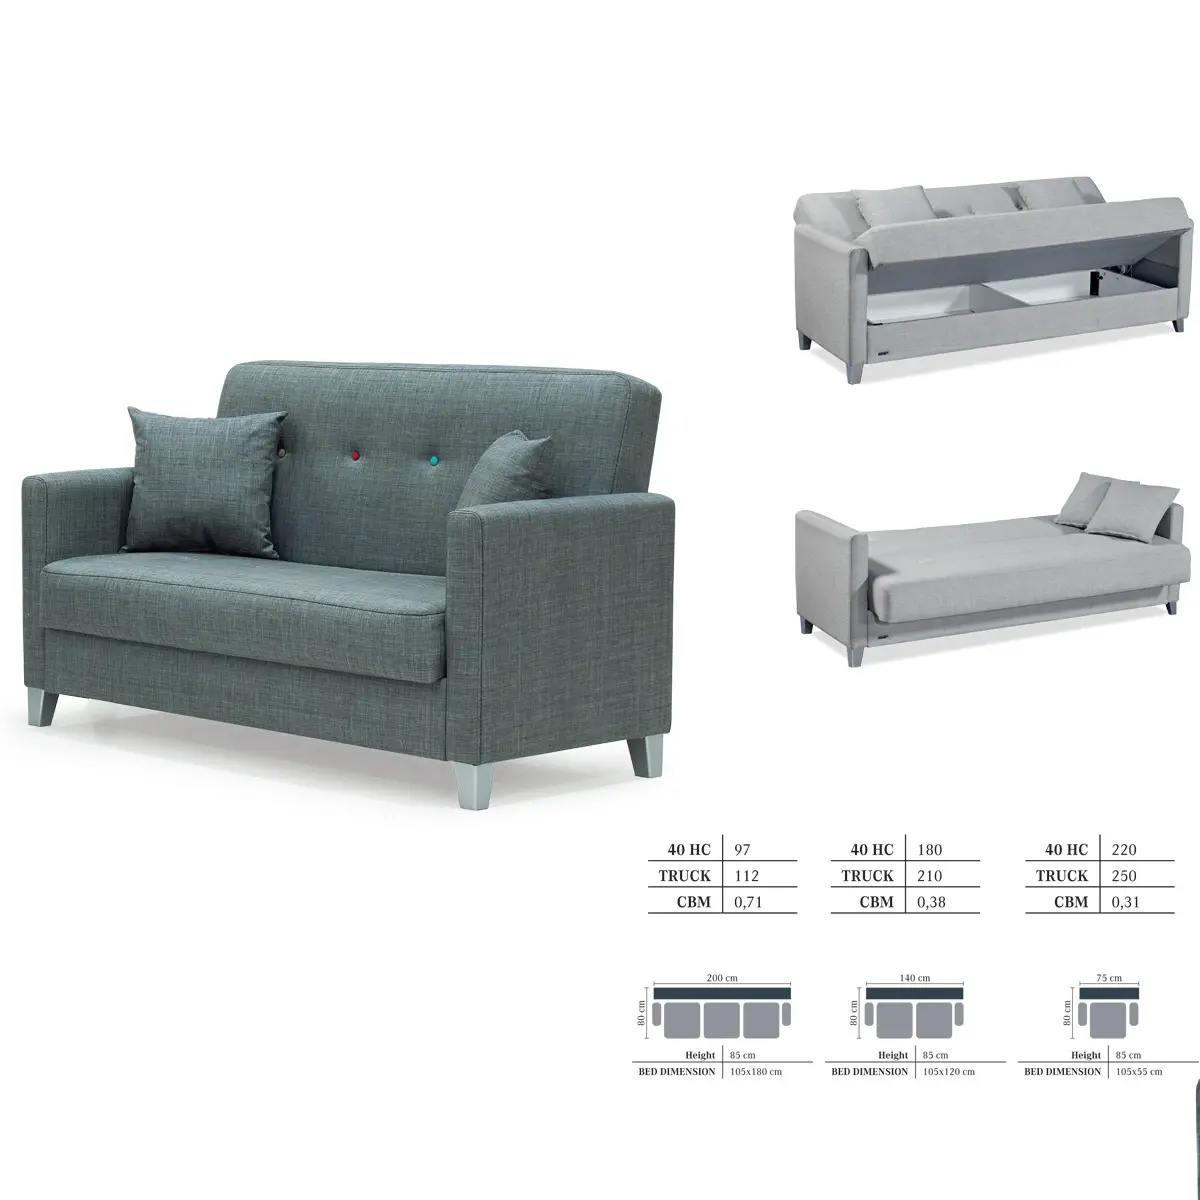 Turkish Origin Sleeper Sofa Bed with Storage and all customized mechanism for Convertible Folding Furniture